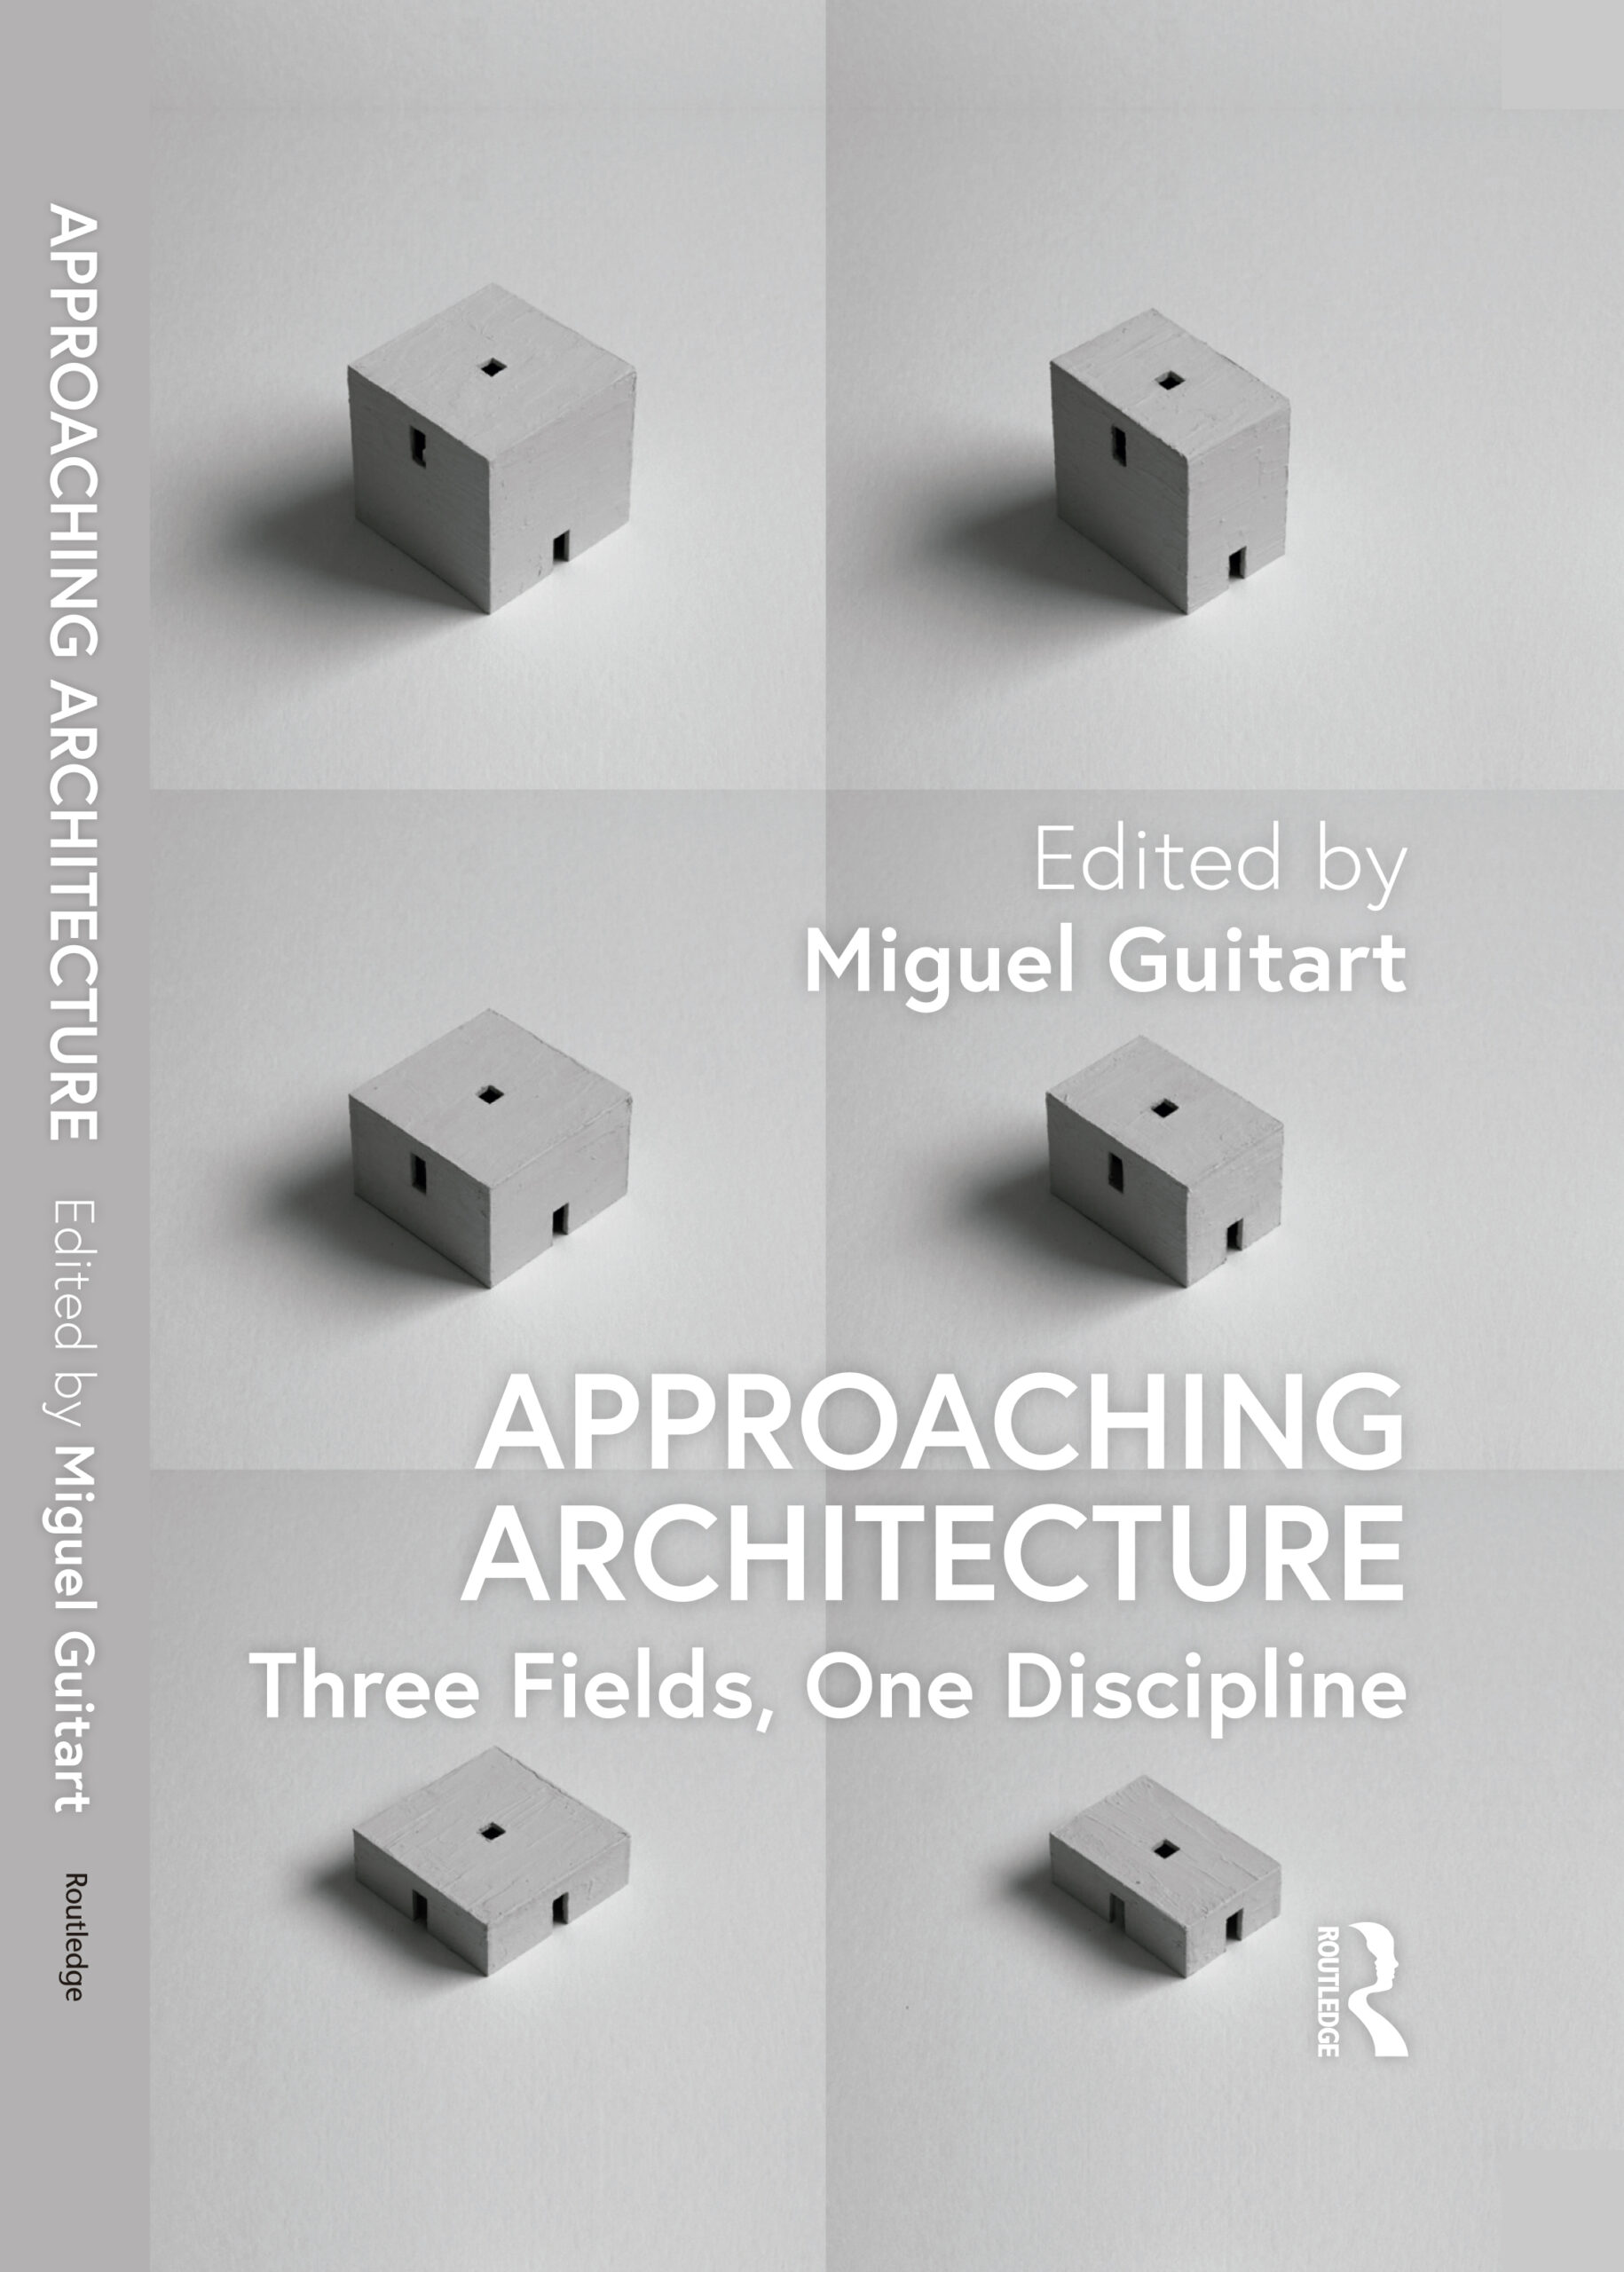 Approaching Architecture by Miguel Guitart Book Cover